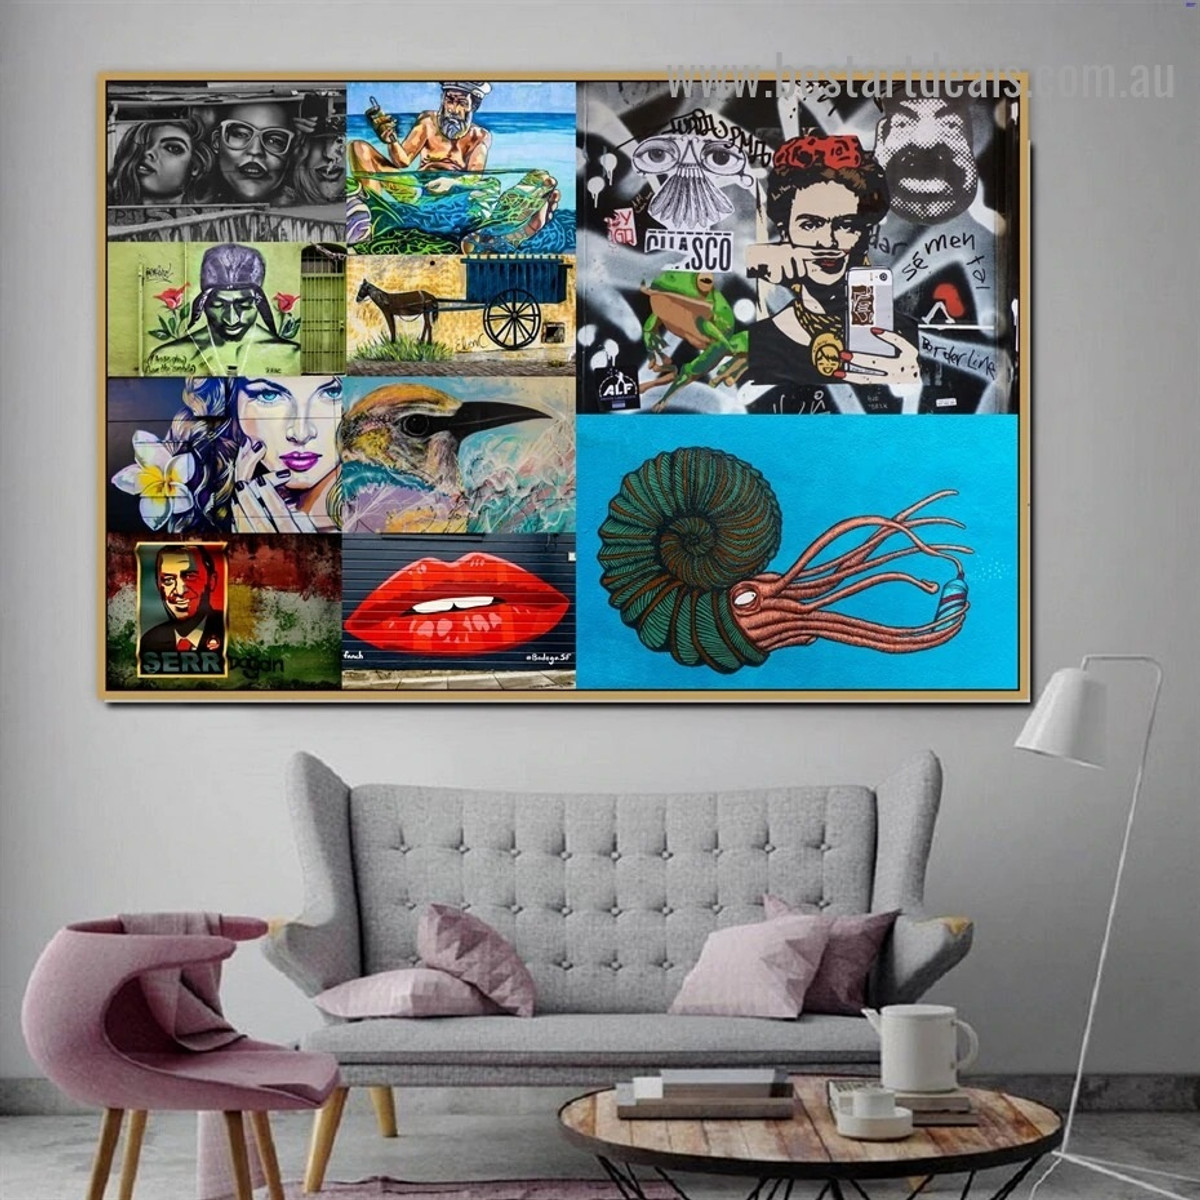 Red Lips Collage Botanical Abstract Figure Graffiti Artwork Image Canvas Print for Room Wall Décor